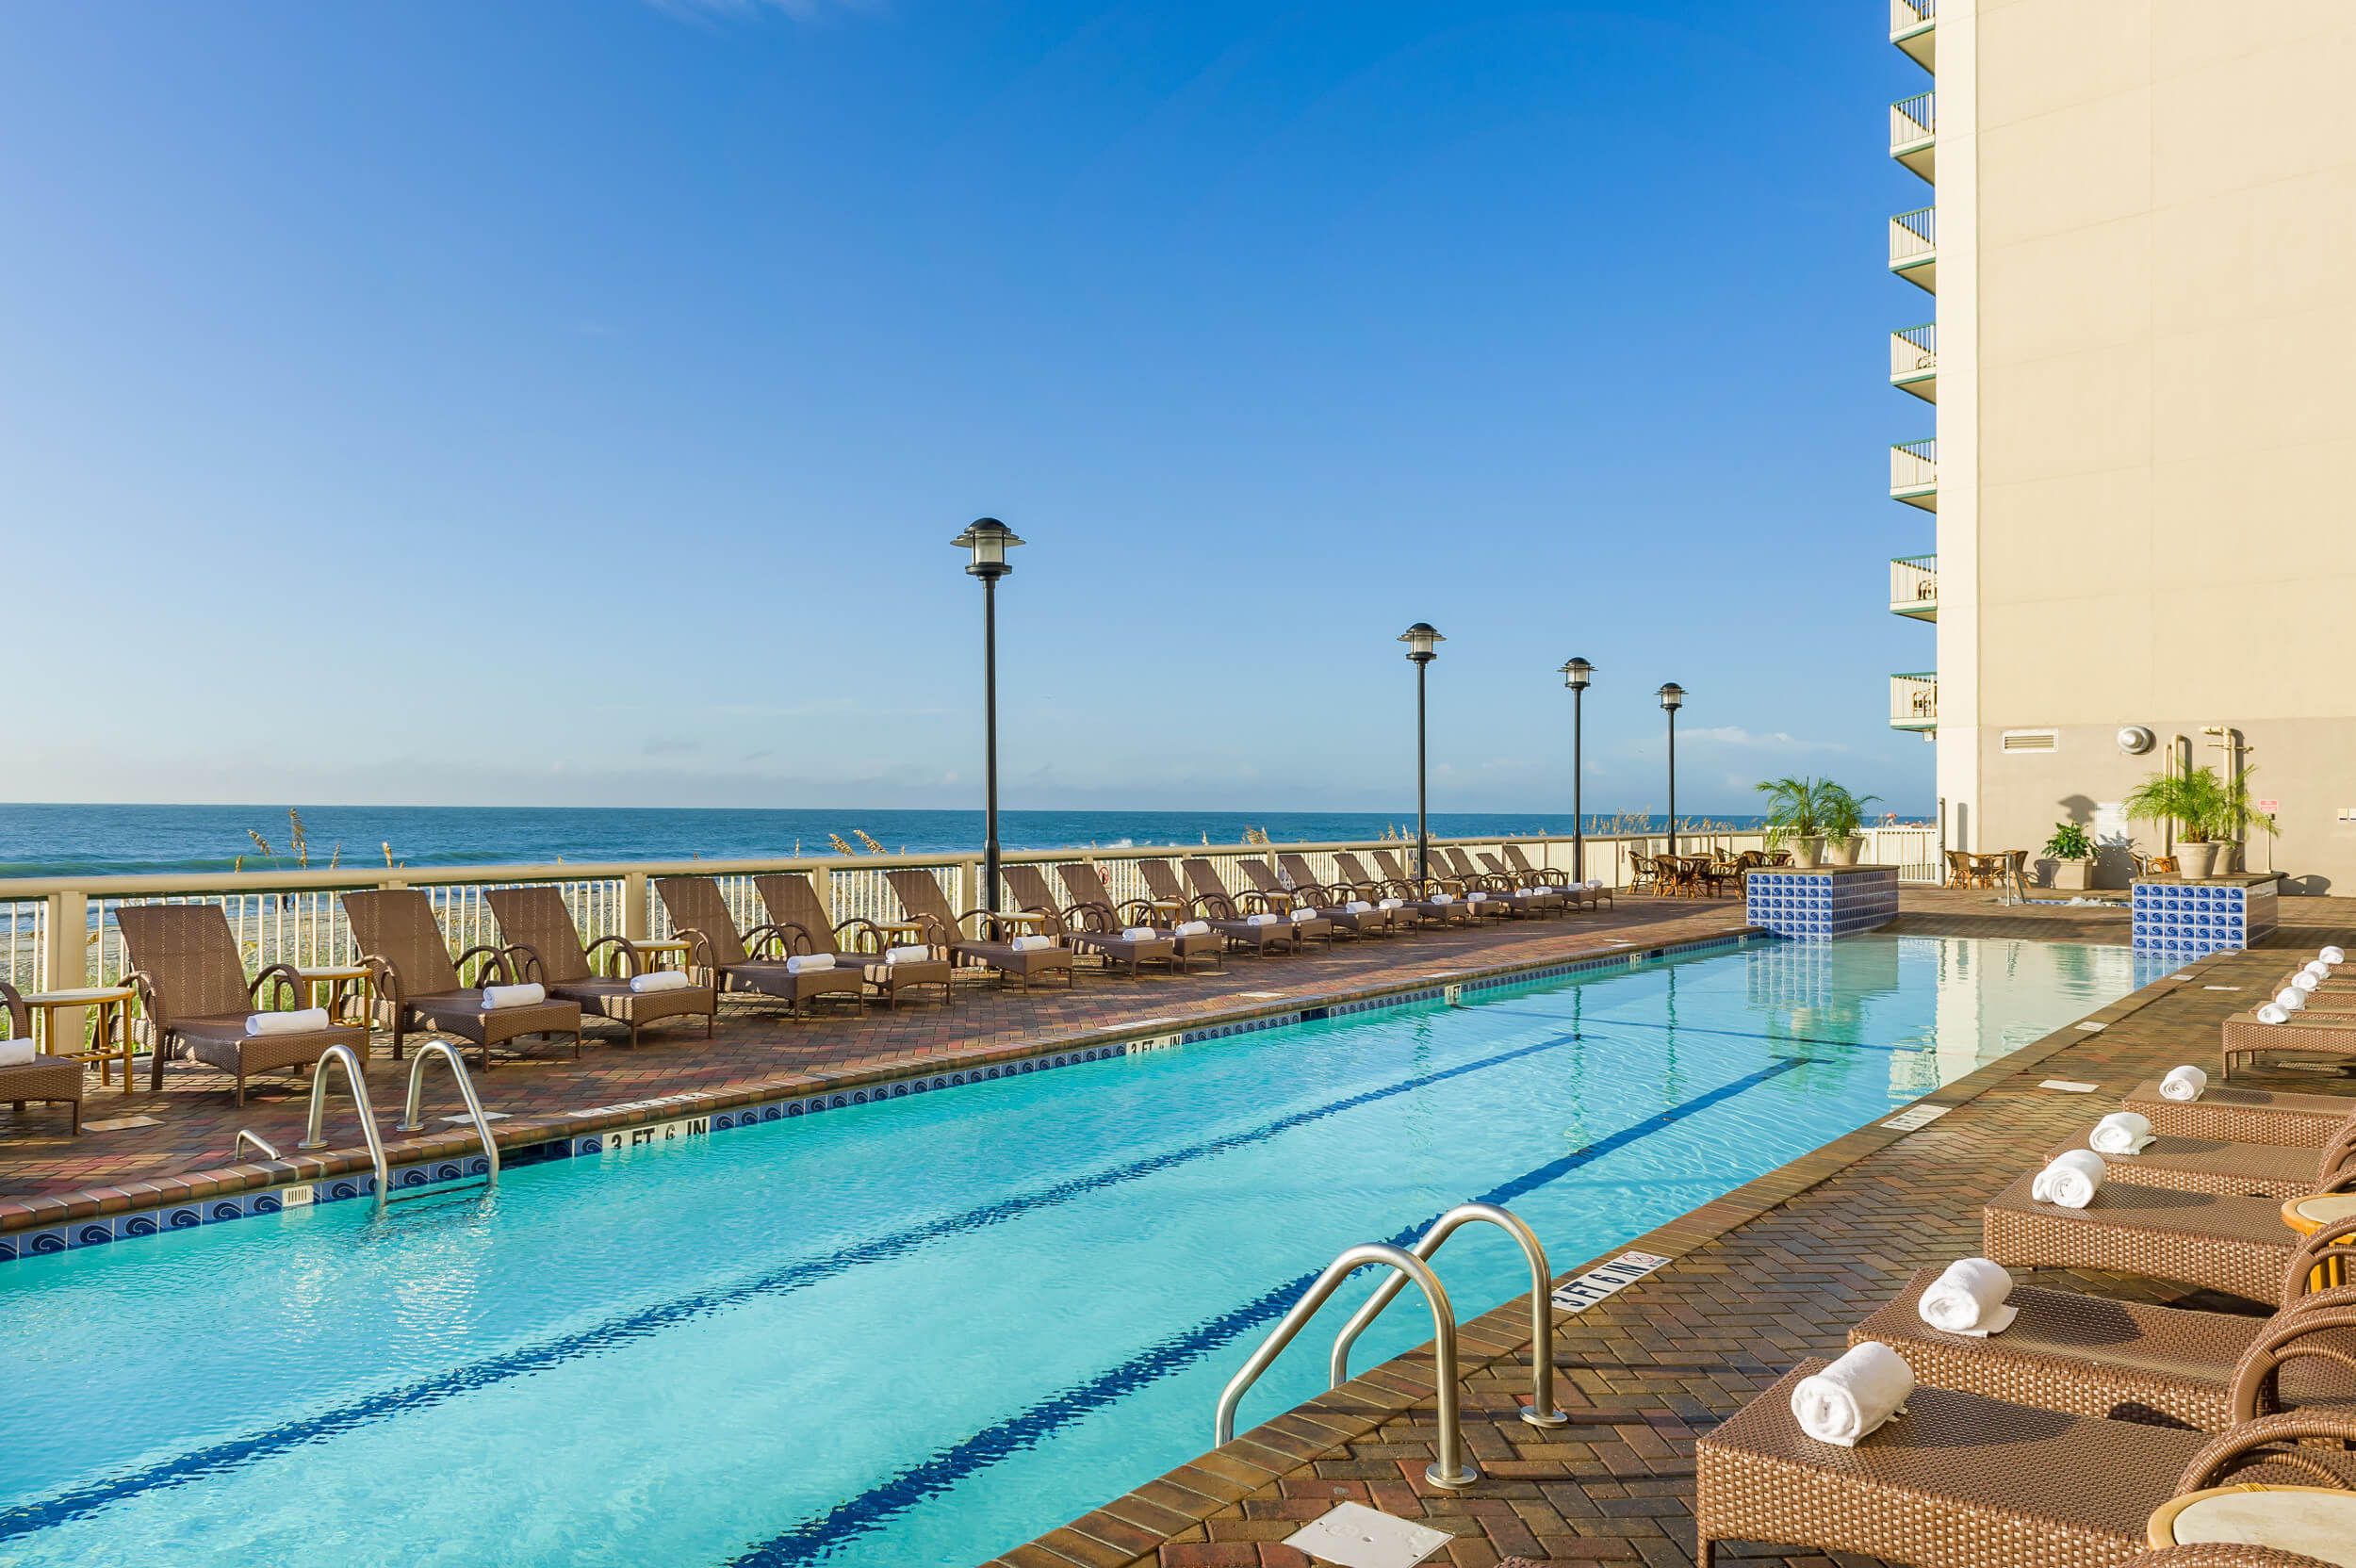 Heated outdoor pool with beach in background | Westgate Myrtle Beach Oceanfront Resort